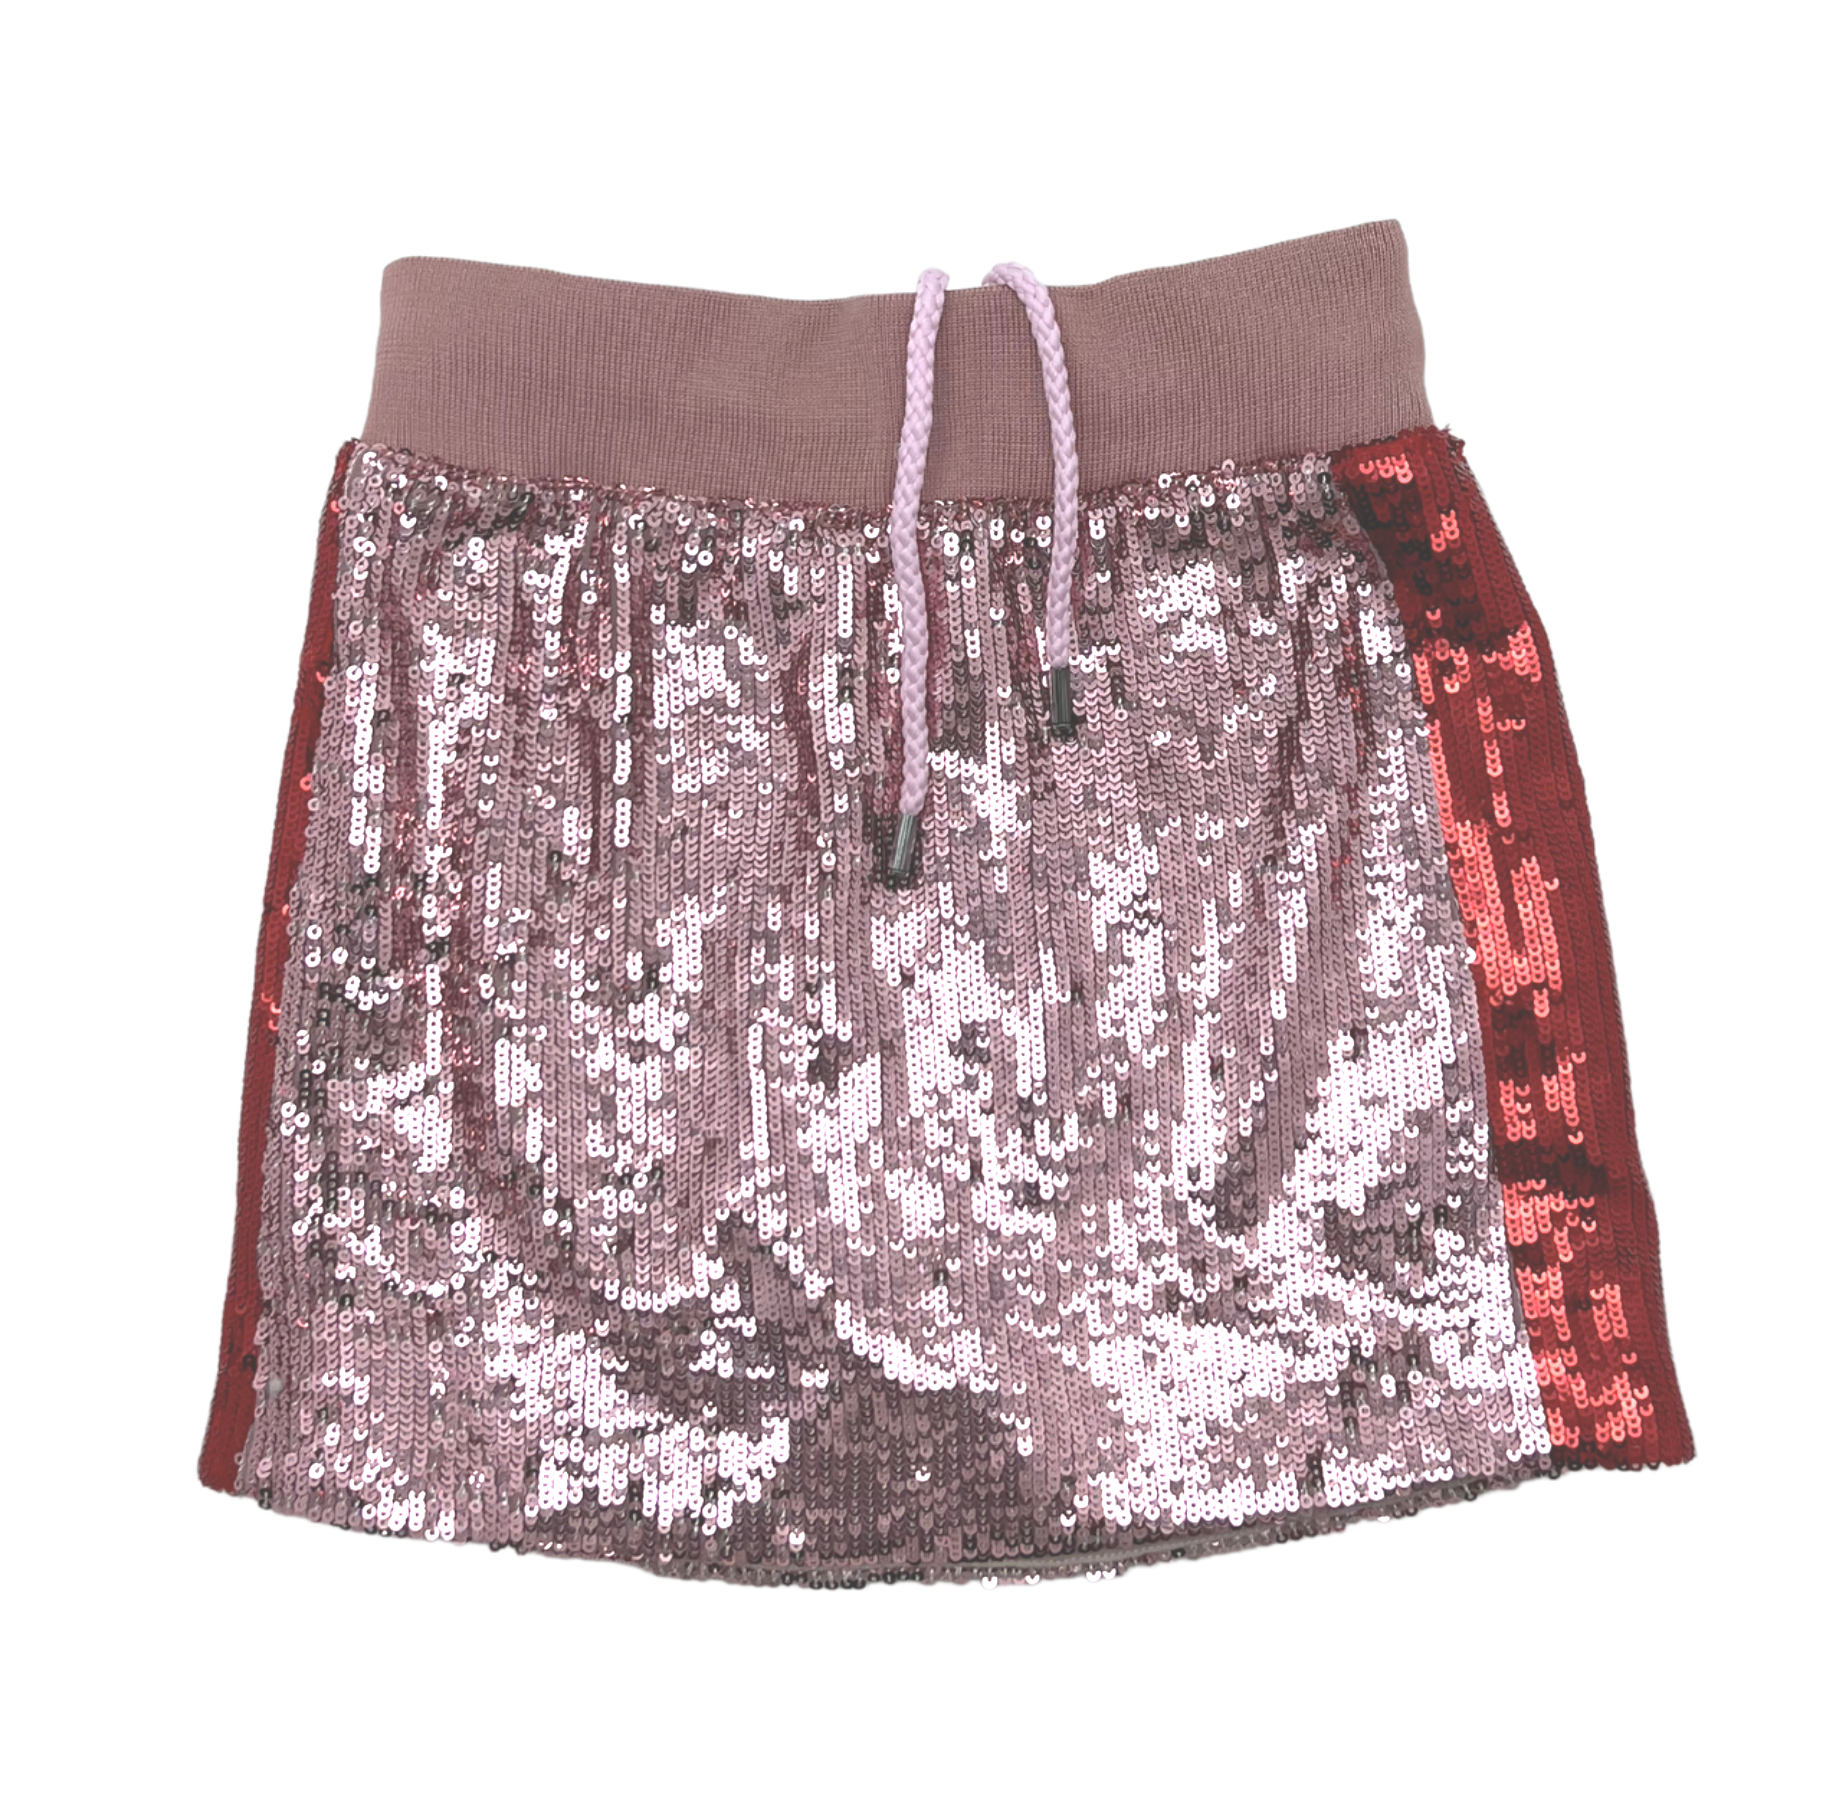 ALBERTA FERRETTI - Pink &amp; red sequined skirt - 8 years old